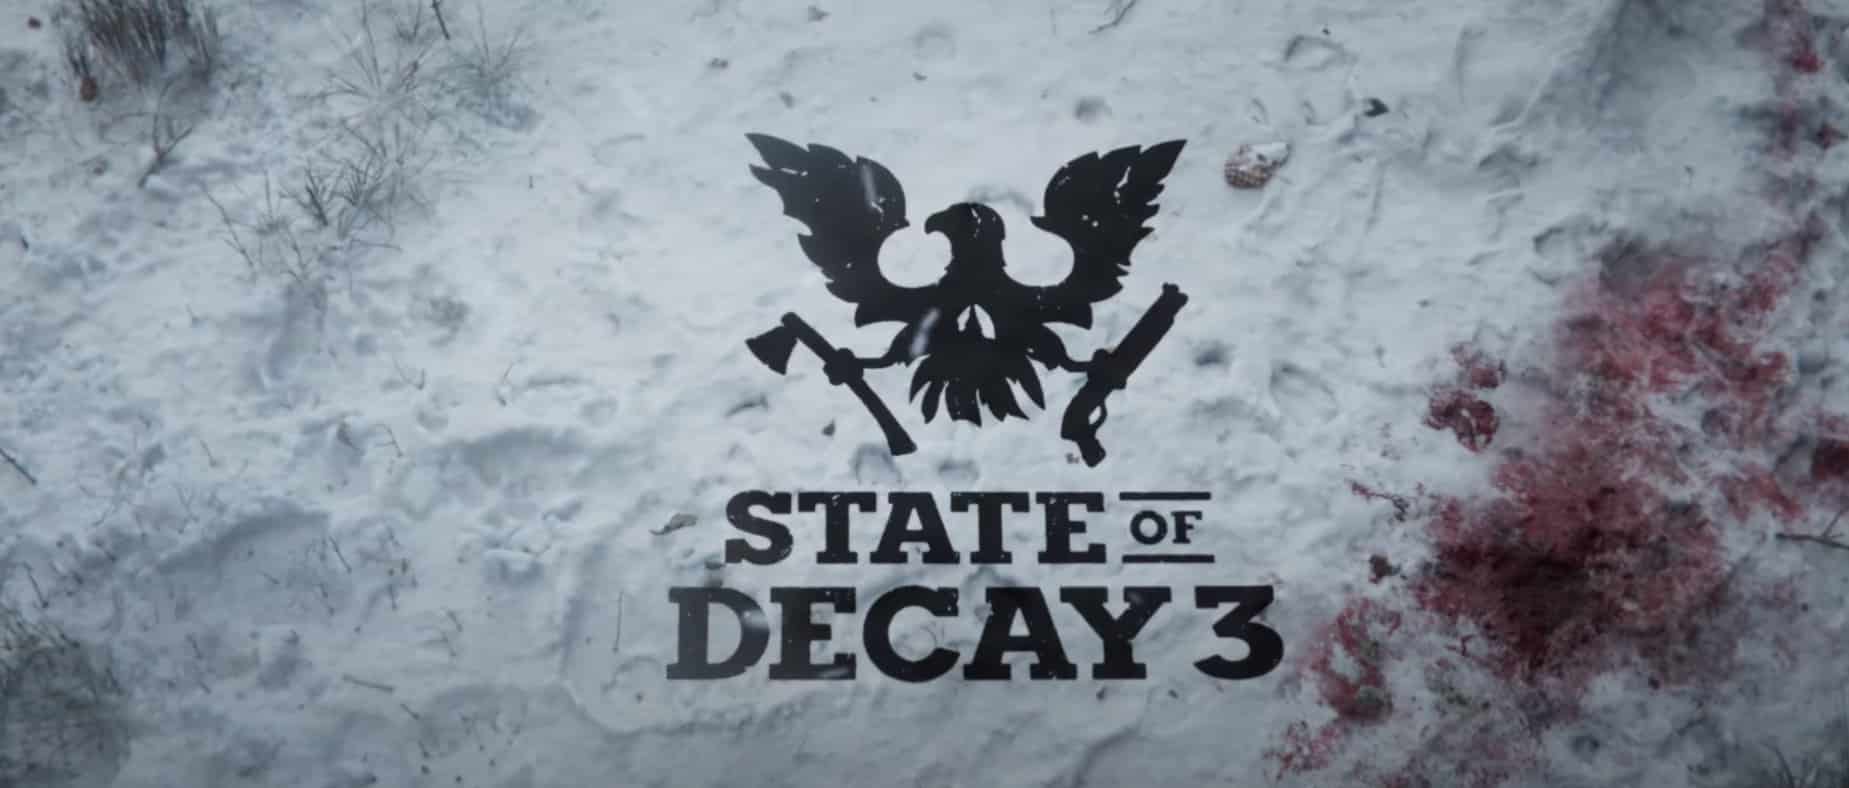 download state of decay 3 release date pc